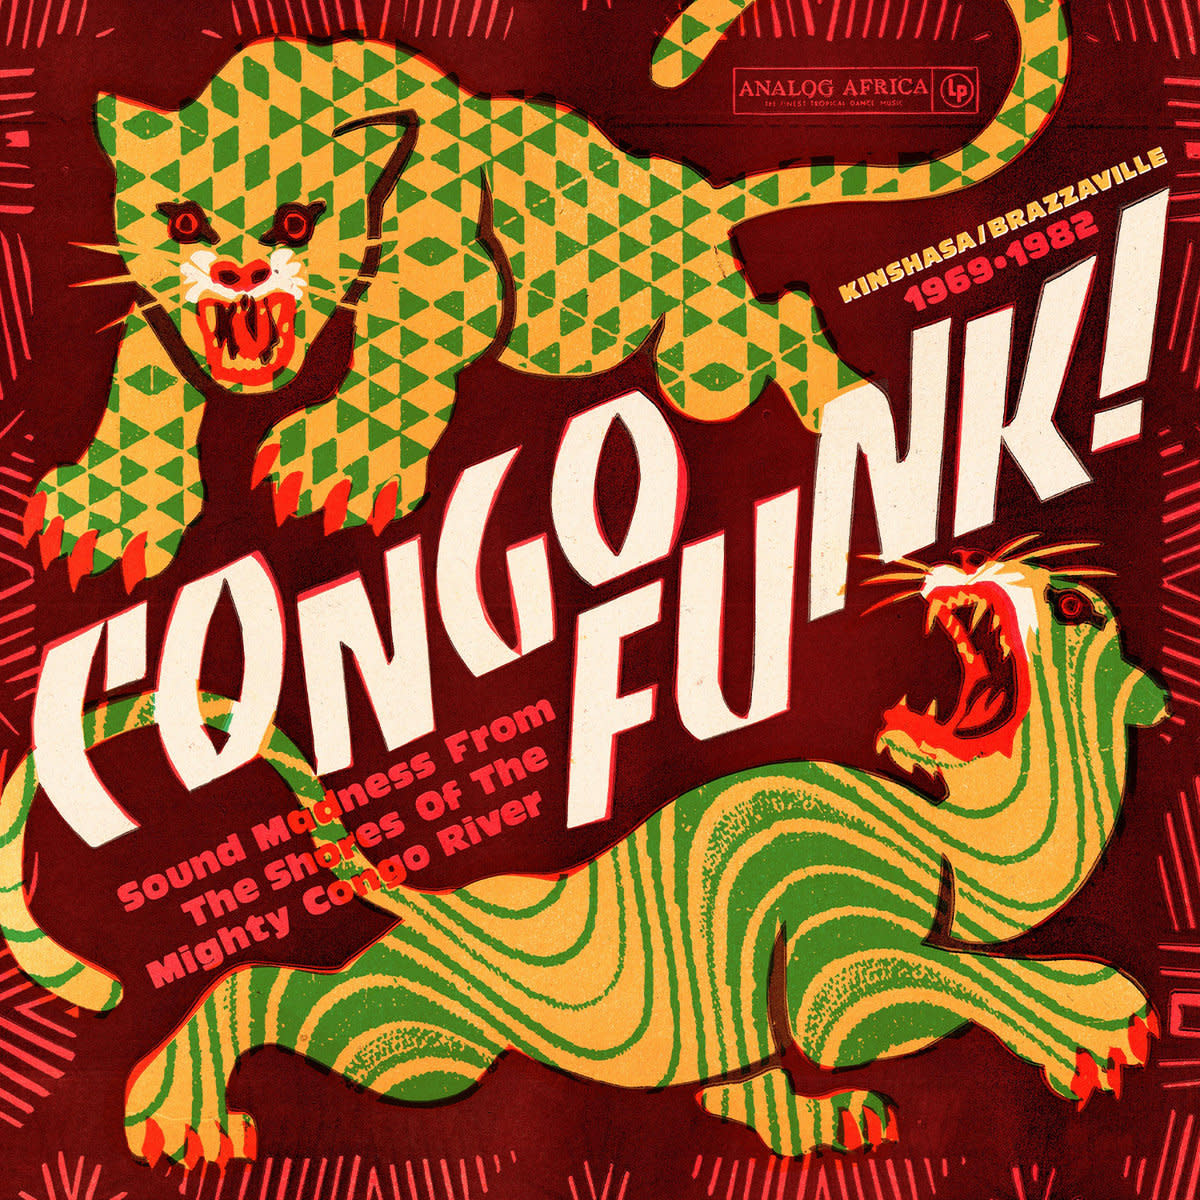 Analog Africa Various - Congo Funk! Sound Madness From the Shores of the Mighty Congo River (Kinshasa / Brazzaville 1969-1982)